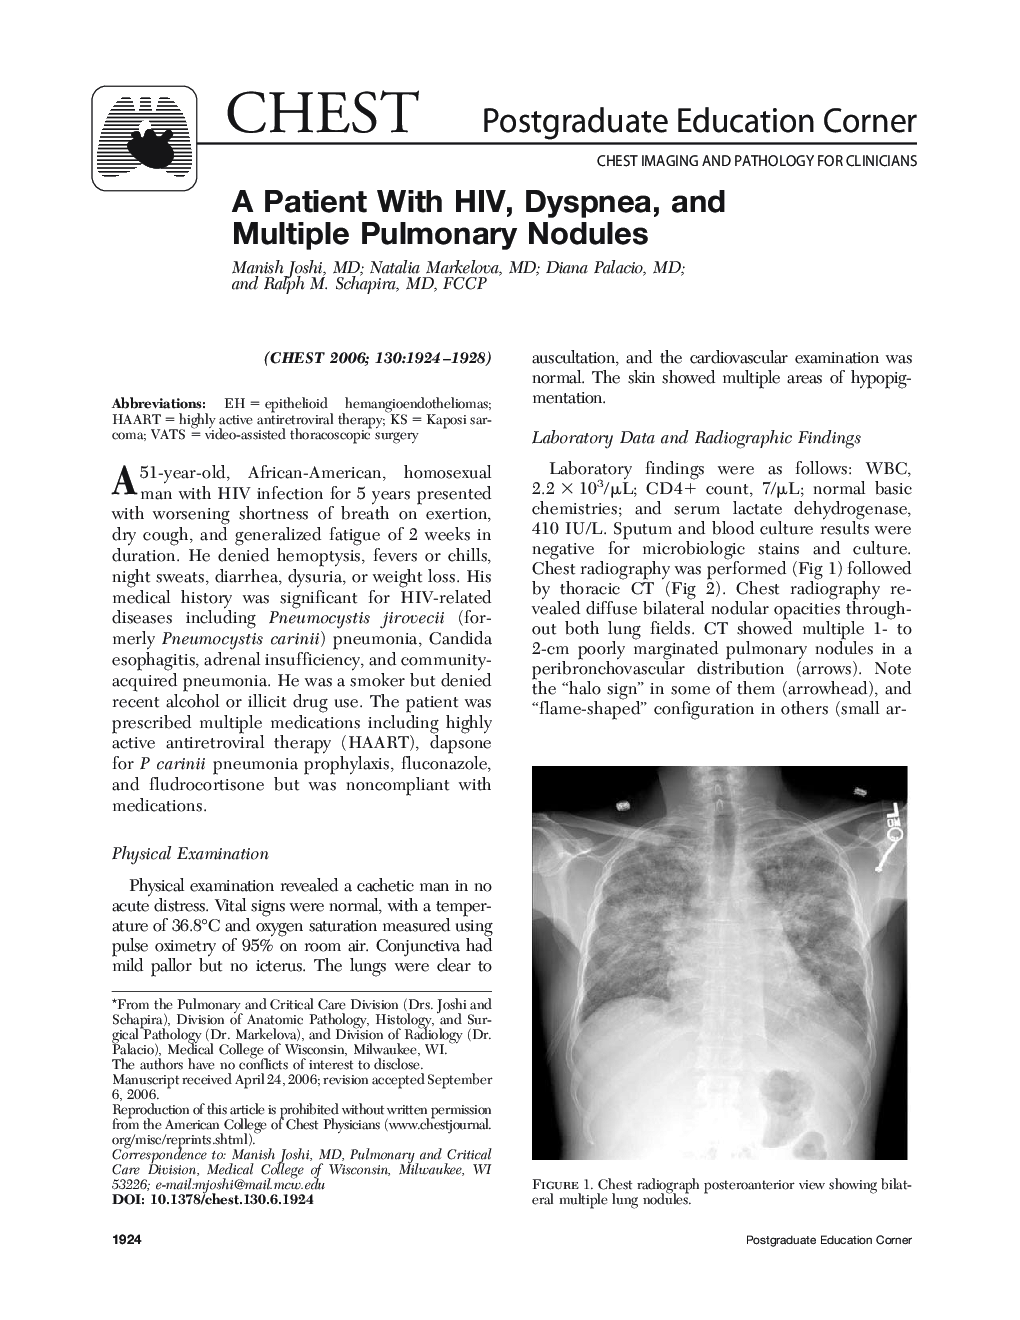 A Patient With HIV, Dyspnea, and Multiple Pulmonary Nodules